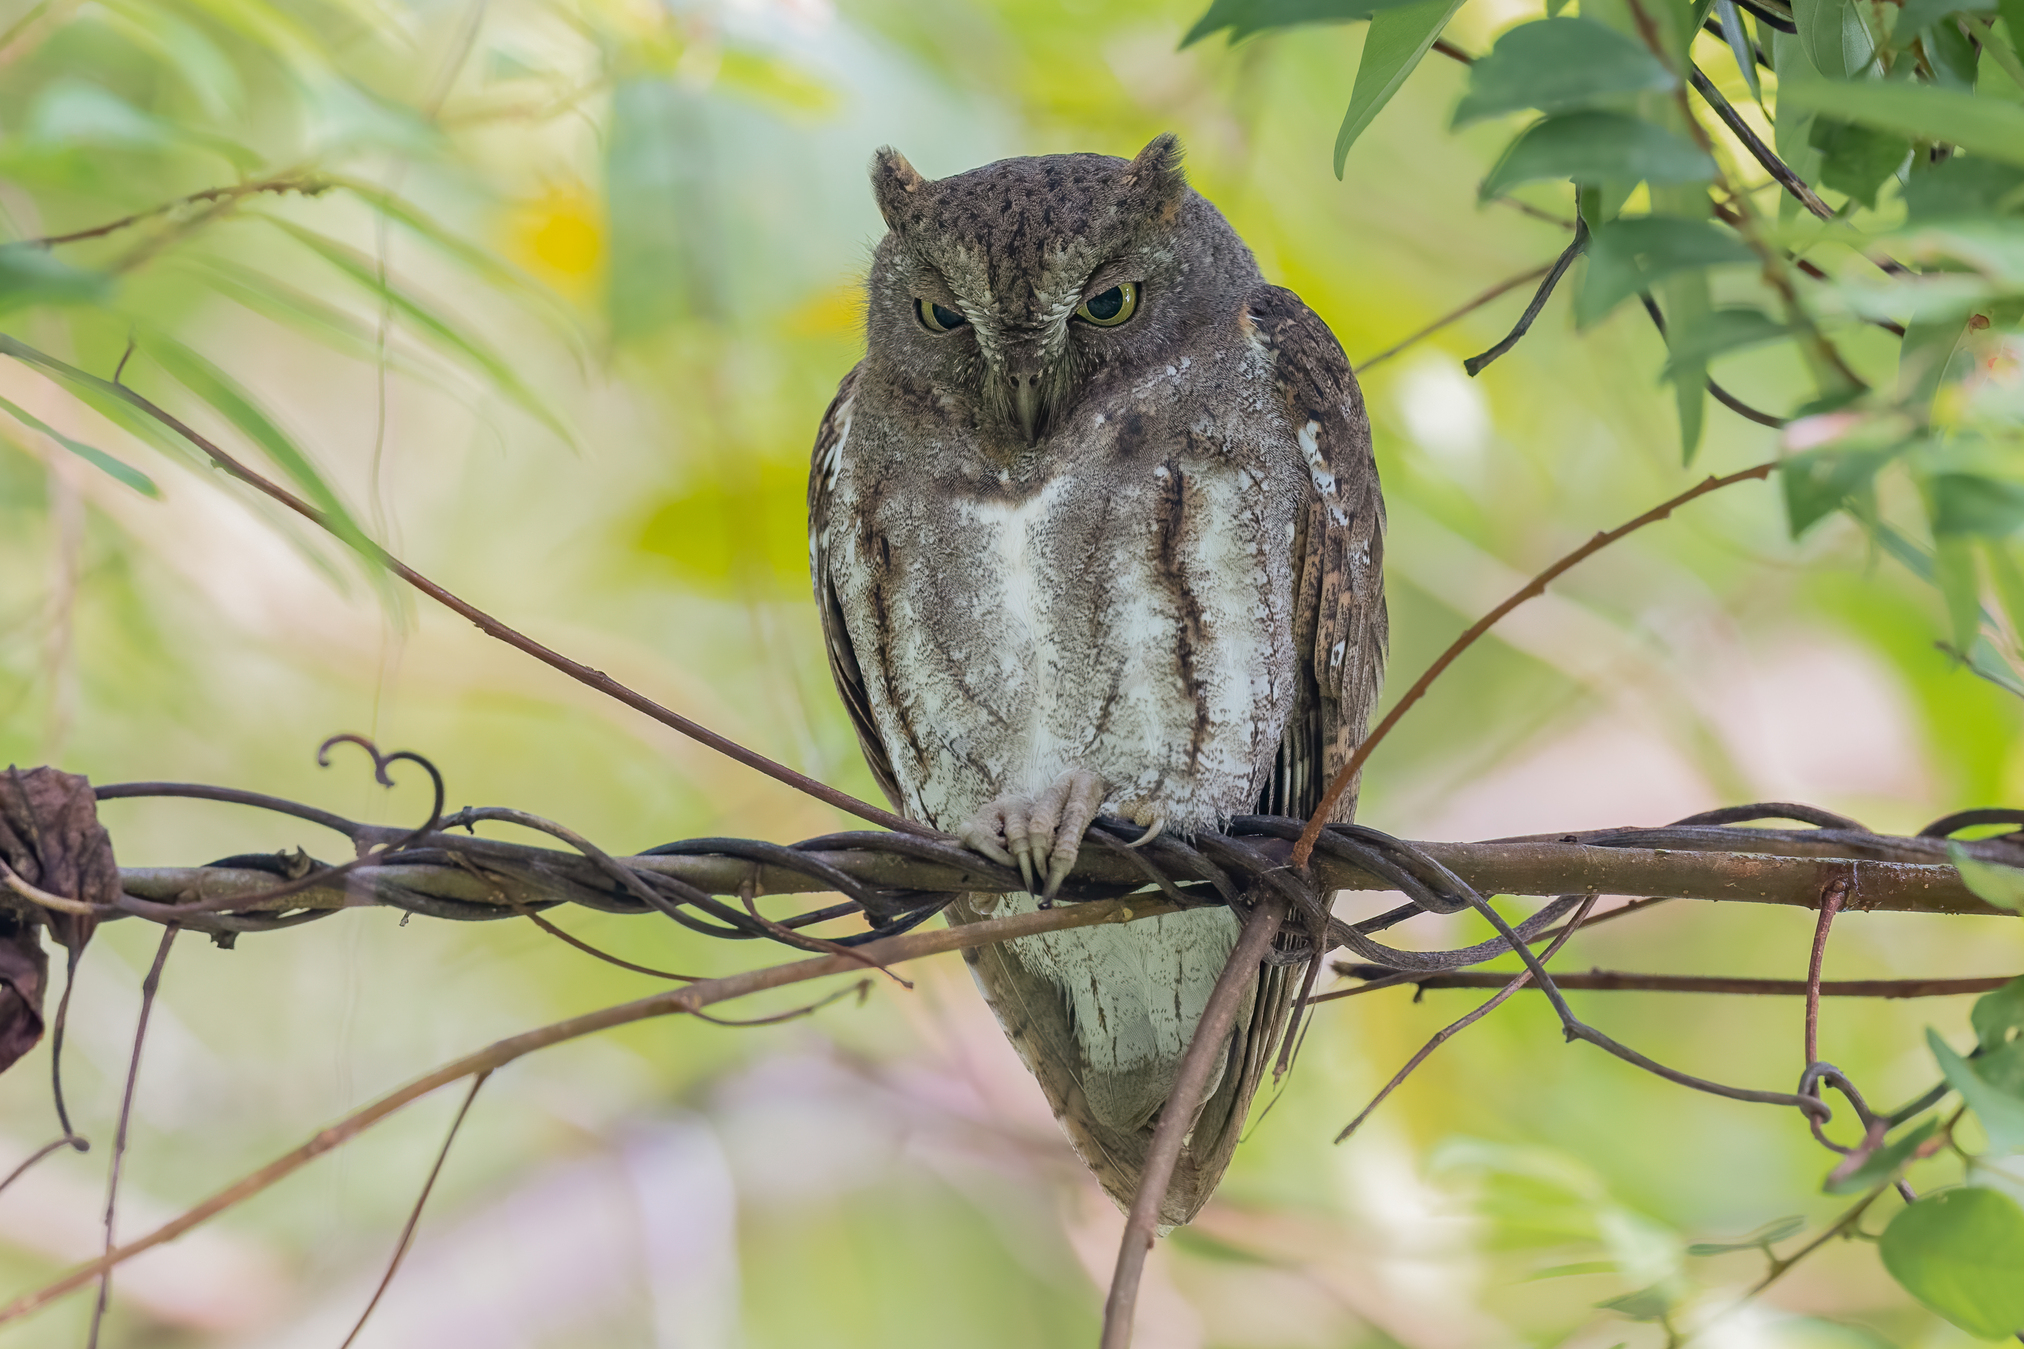 Oriental Scops Owl at Thomson Nature Park on 5 Mar 2022. Photo credit: Adrian Silas Tay